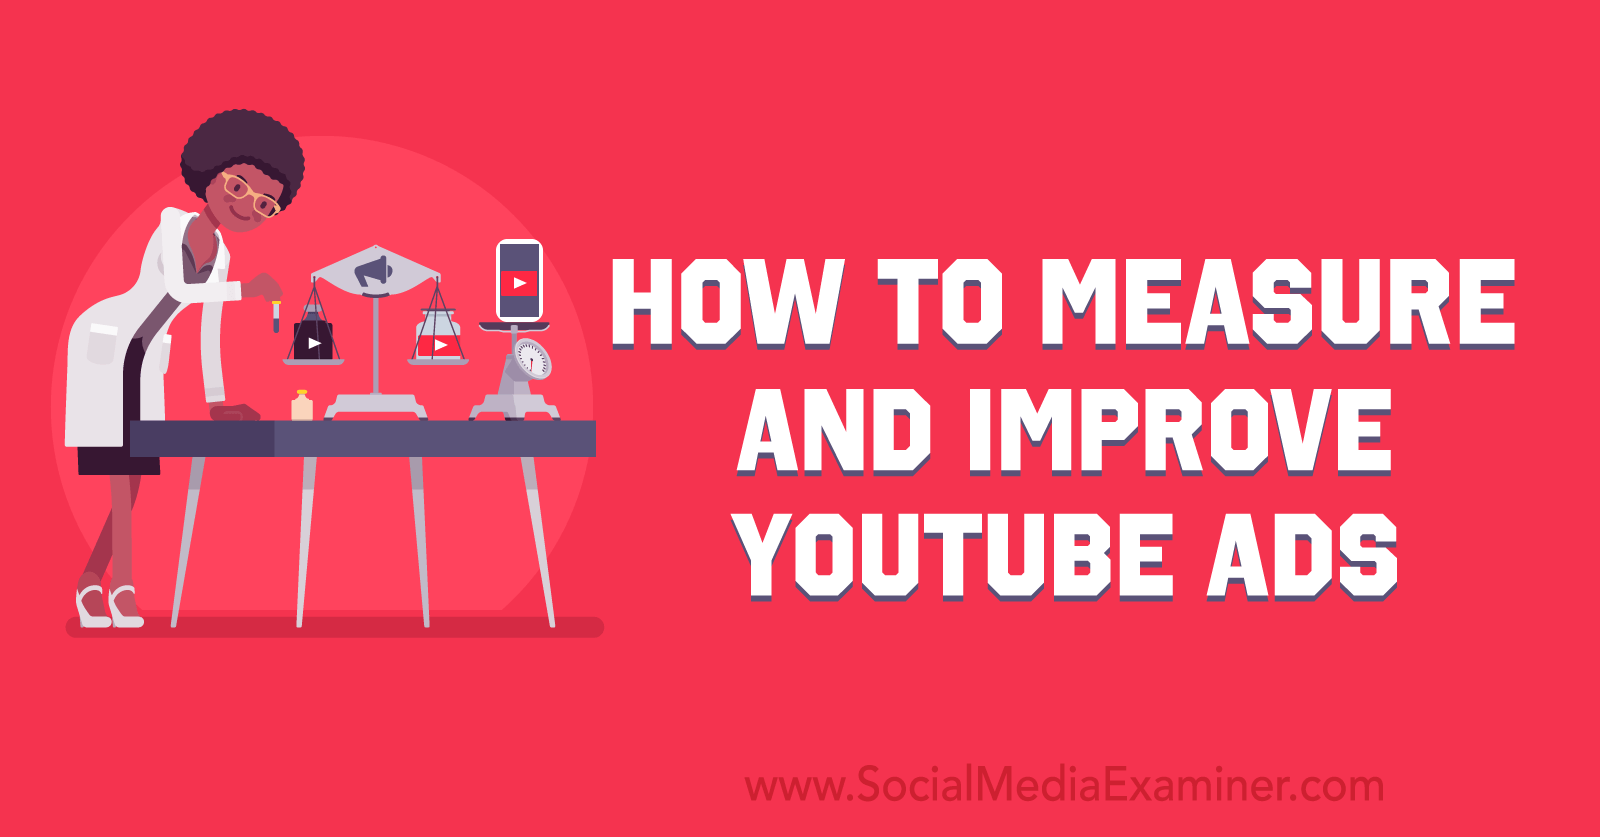 How to Measure and Improve YouTube Ads by Social Media Examiner